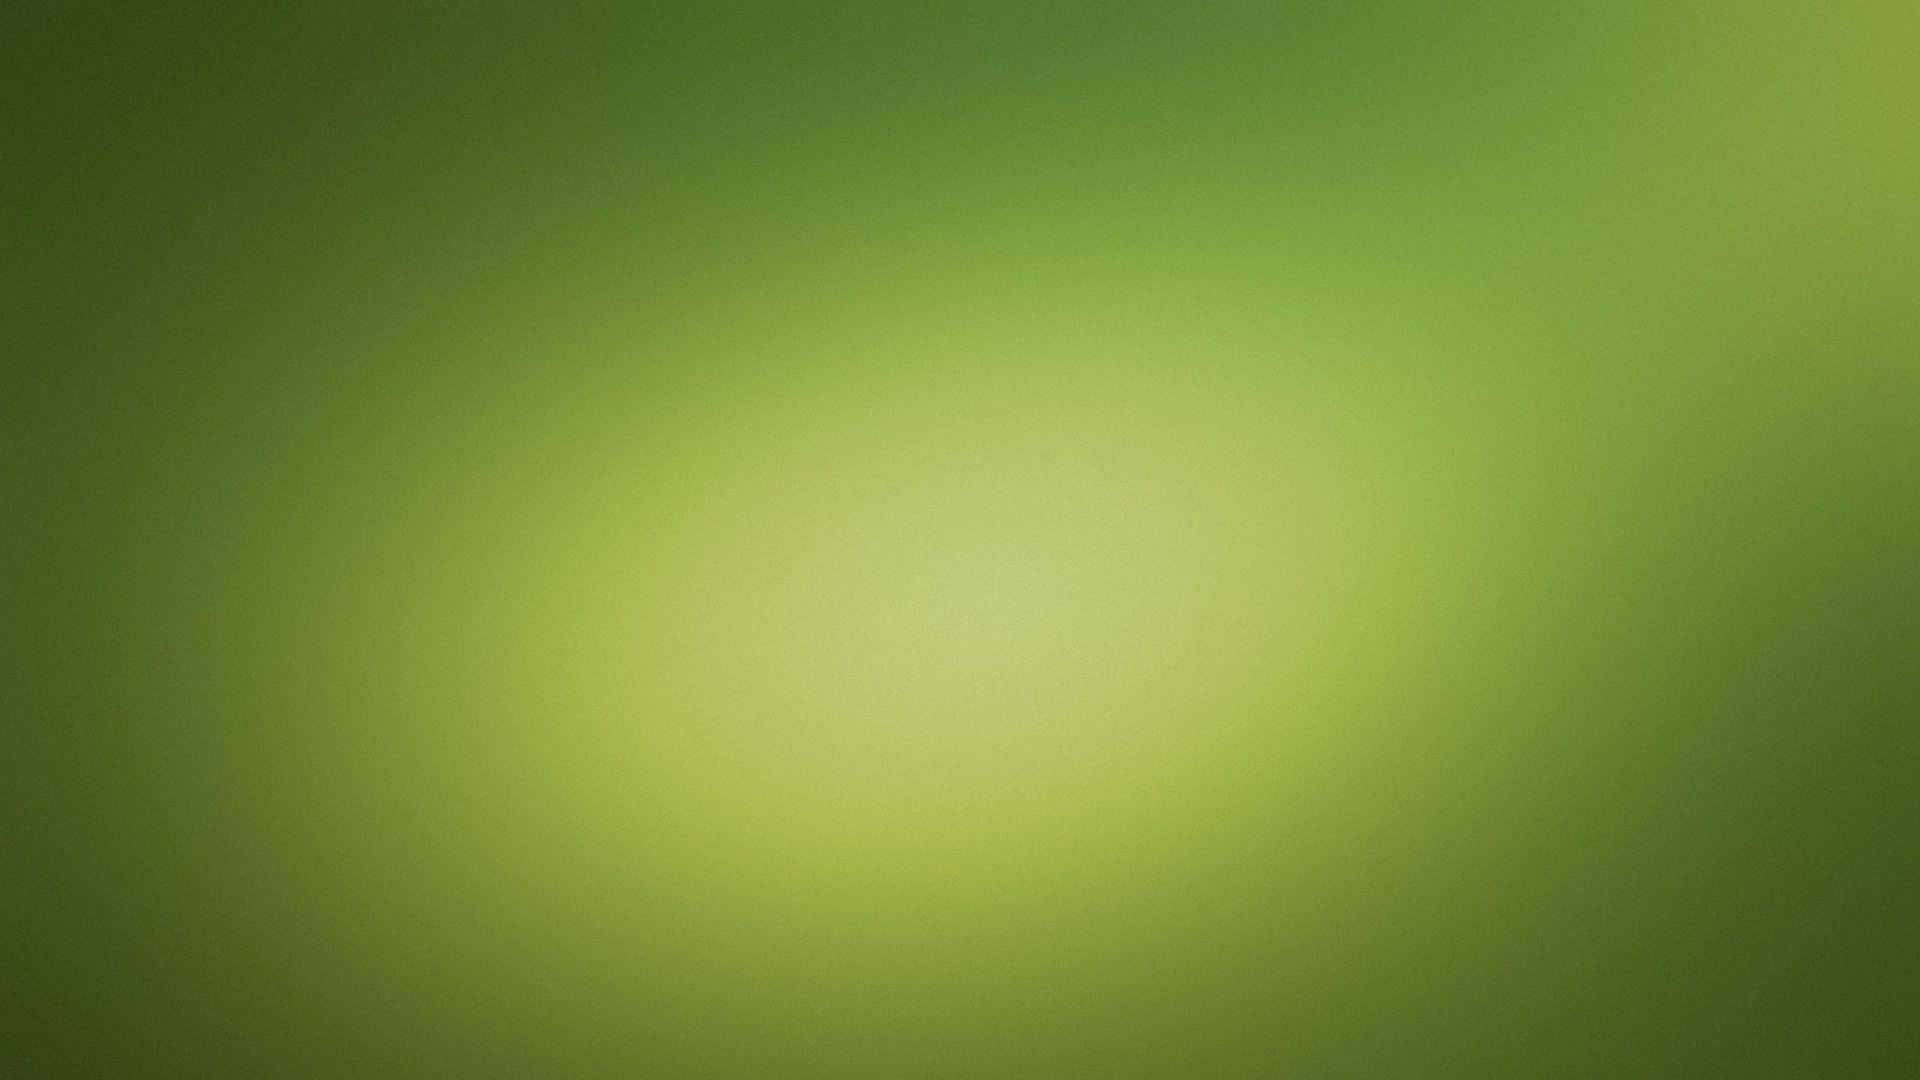 Download Light Green Backgrounds Wallpapers in 1920x1080 Resolution